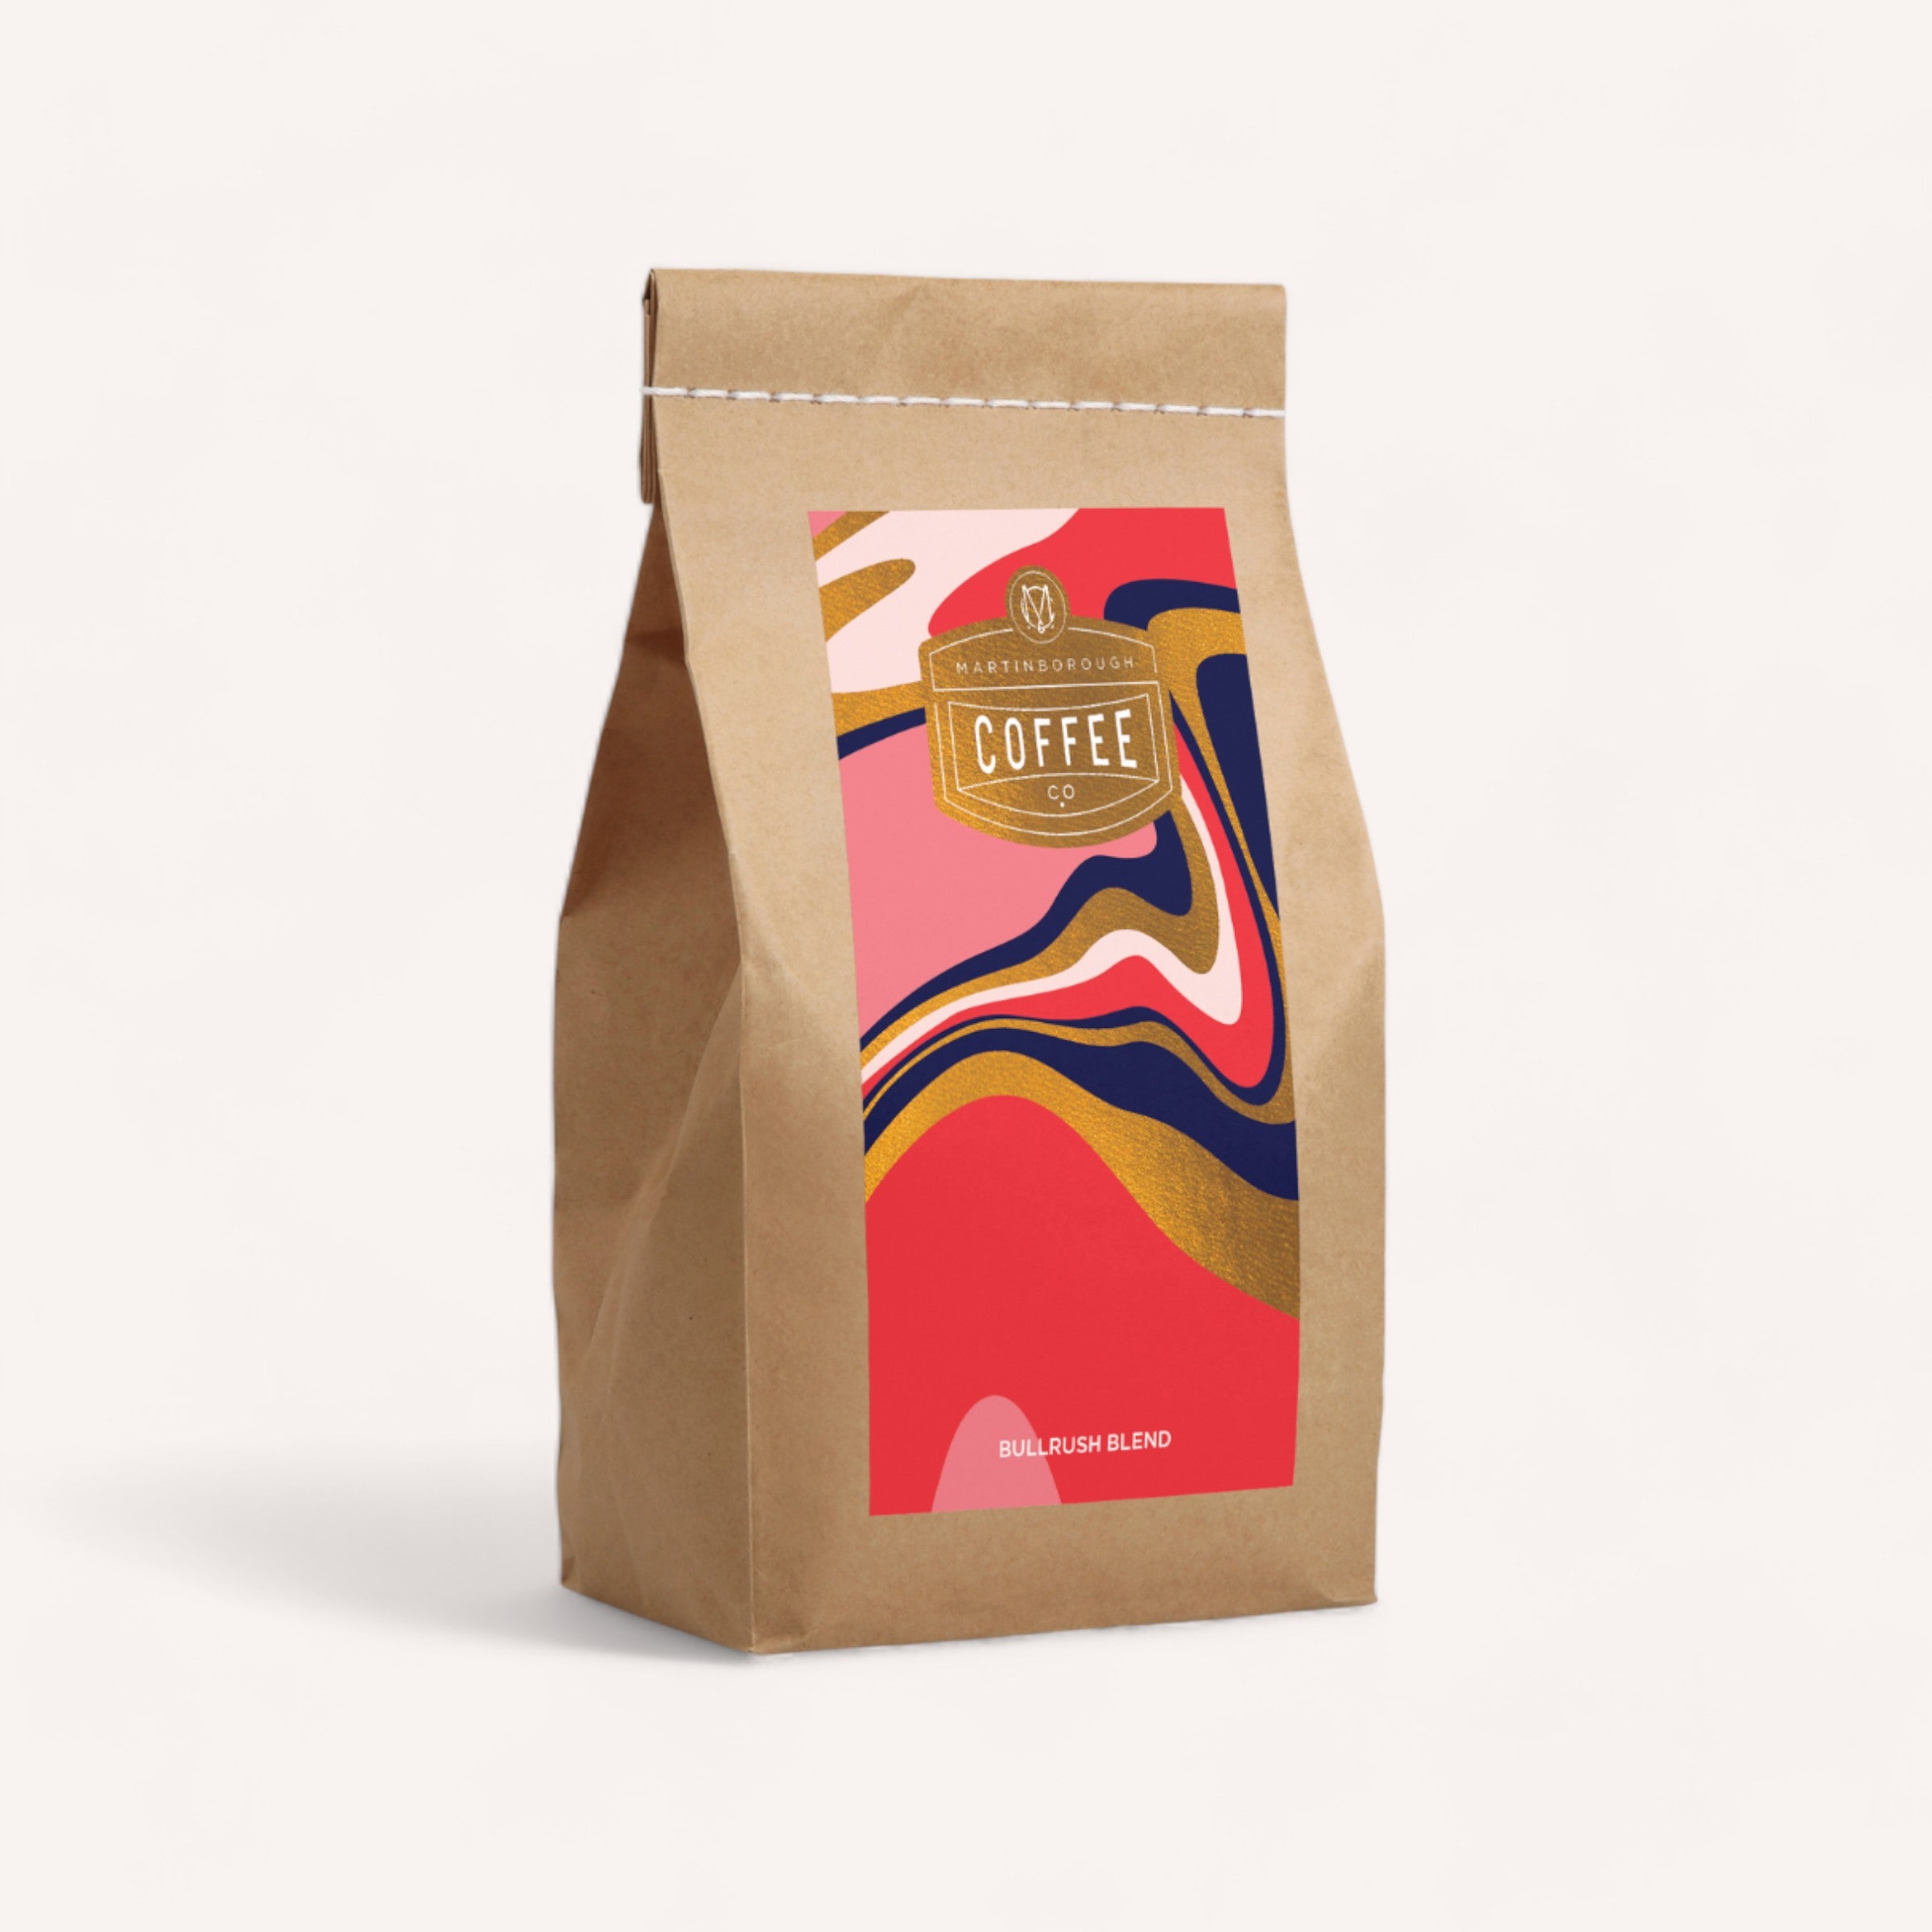 A stylishly branded Bullrush Coffee by Martinborough Coffee Co bag with a modern, colorful design, standing upright against a clean, white background.